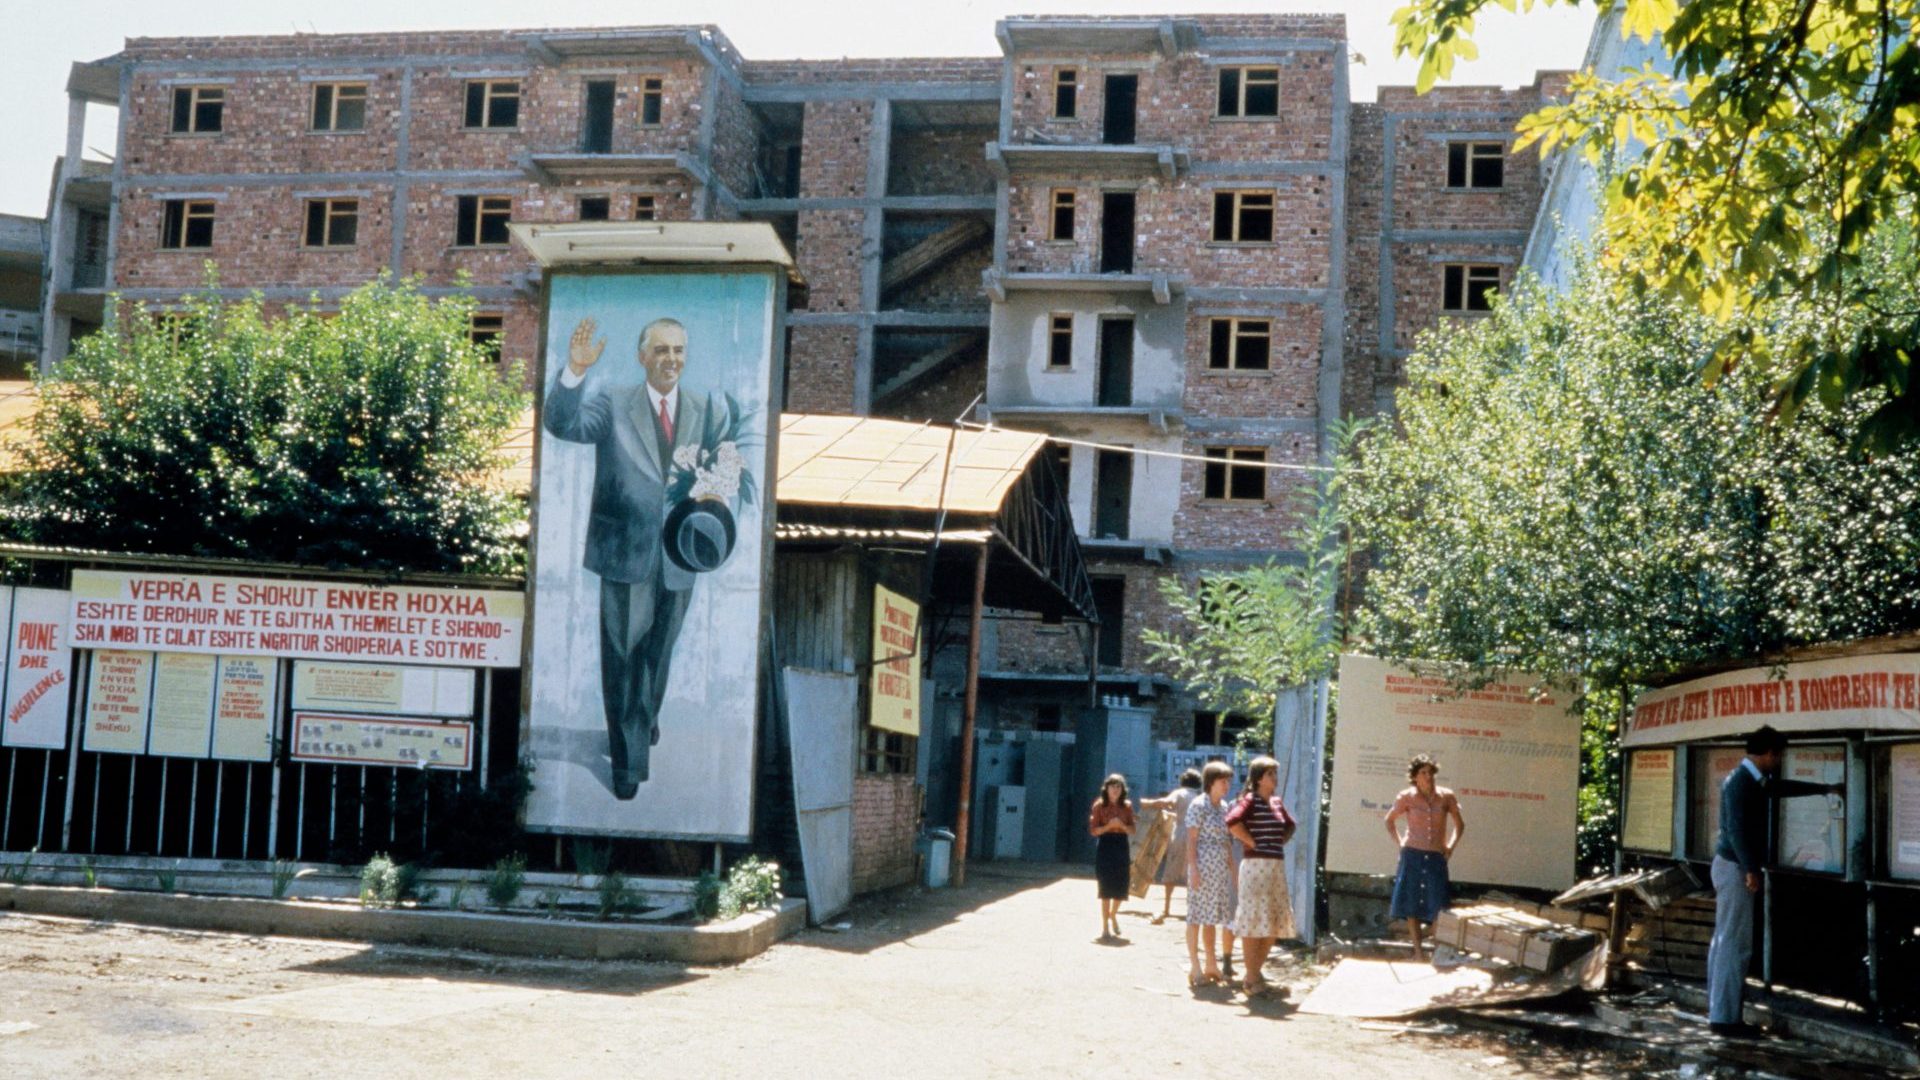 A giant portrait of the late Albanian leader Enver Hoxha near a propaganda poster in Tirana, September 1985. Photo: Georges Gobet/AFP/Getty